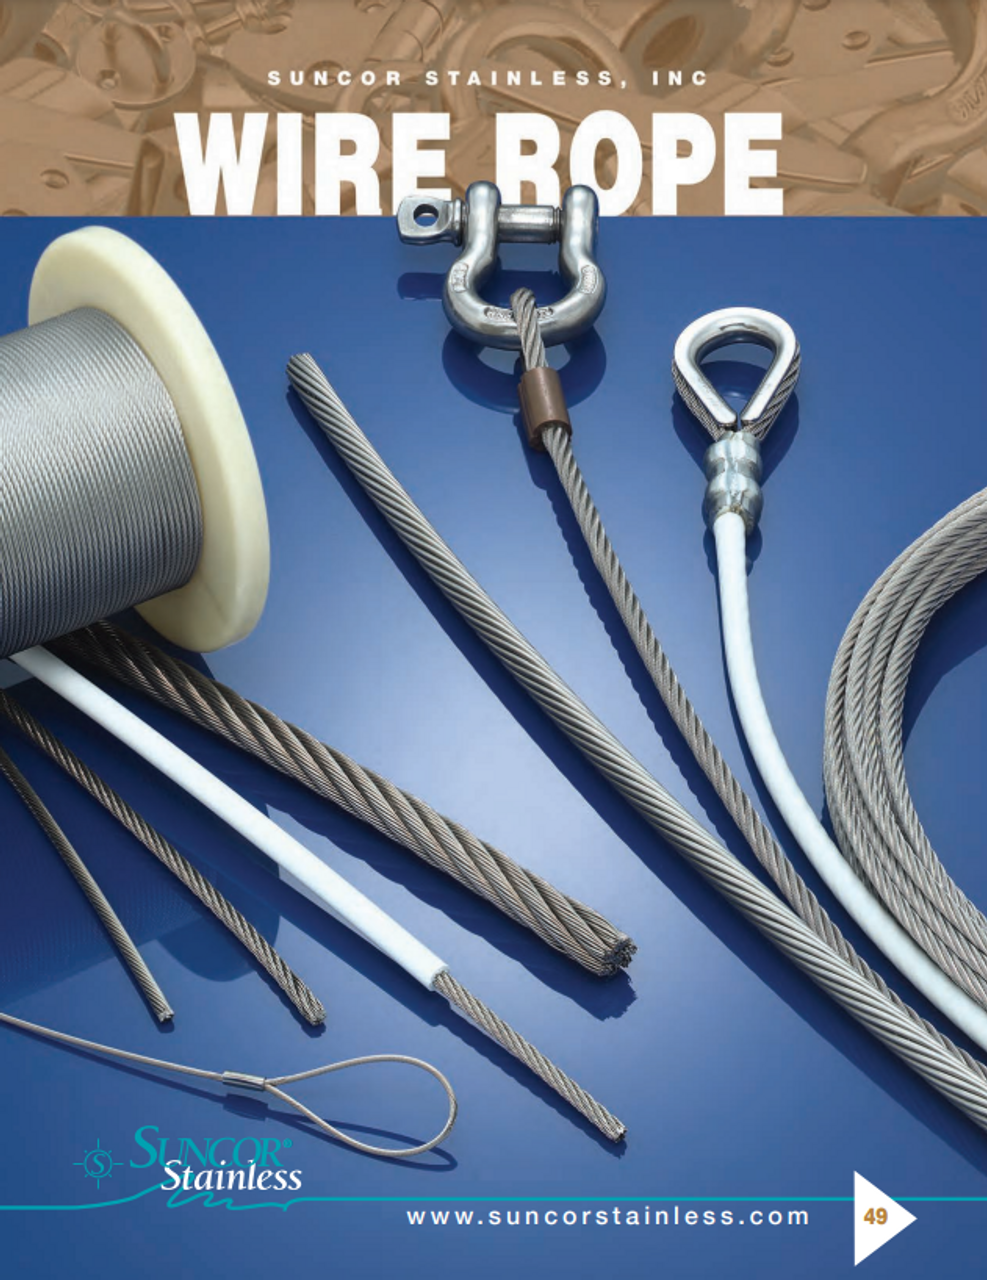 Suncor Stainless Wire Rope Brochure